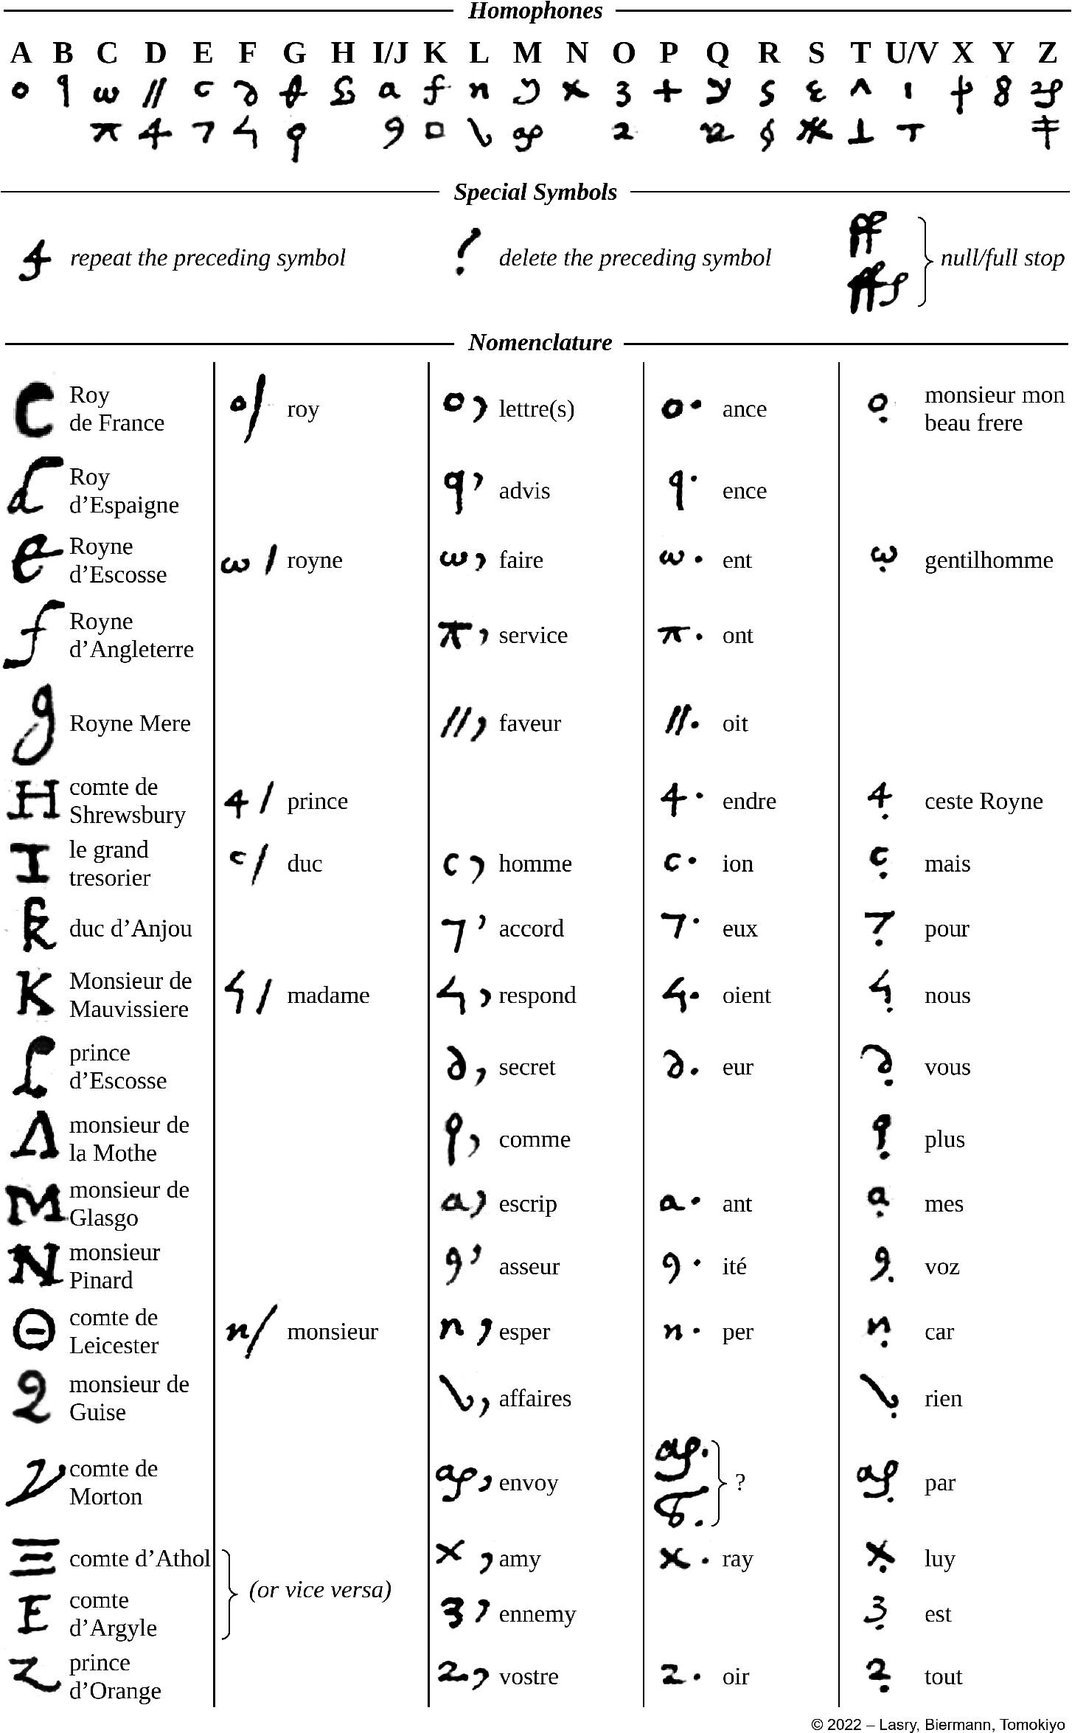 Symbols used by Mary, Queen of Scots, in her encrypted messages to the French ambassador